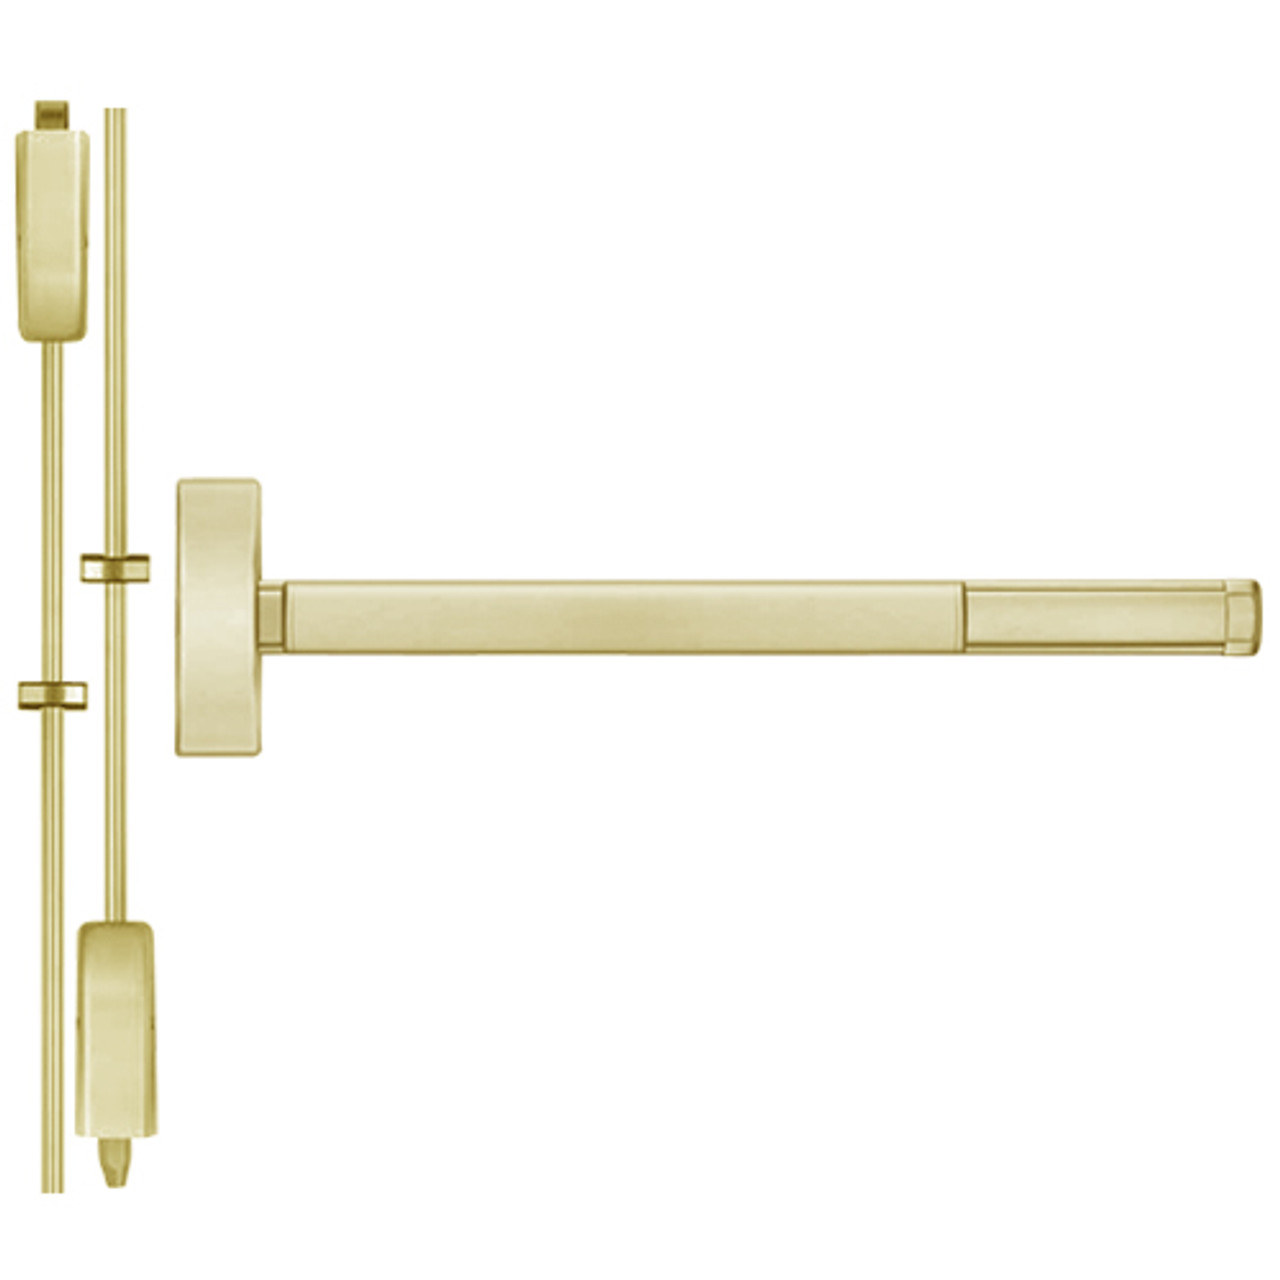 DEFL2208-606-48 PHI 2200 Series Fire Rated Apex Surface Vertical Rod Device with Delayed Egress Prepped for Key Controls Lever/Knob in Satin Brass Finish